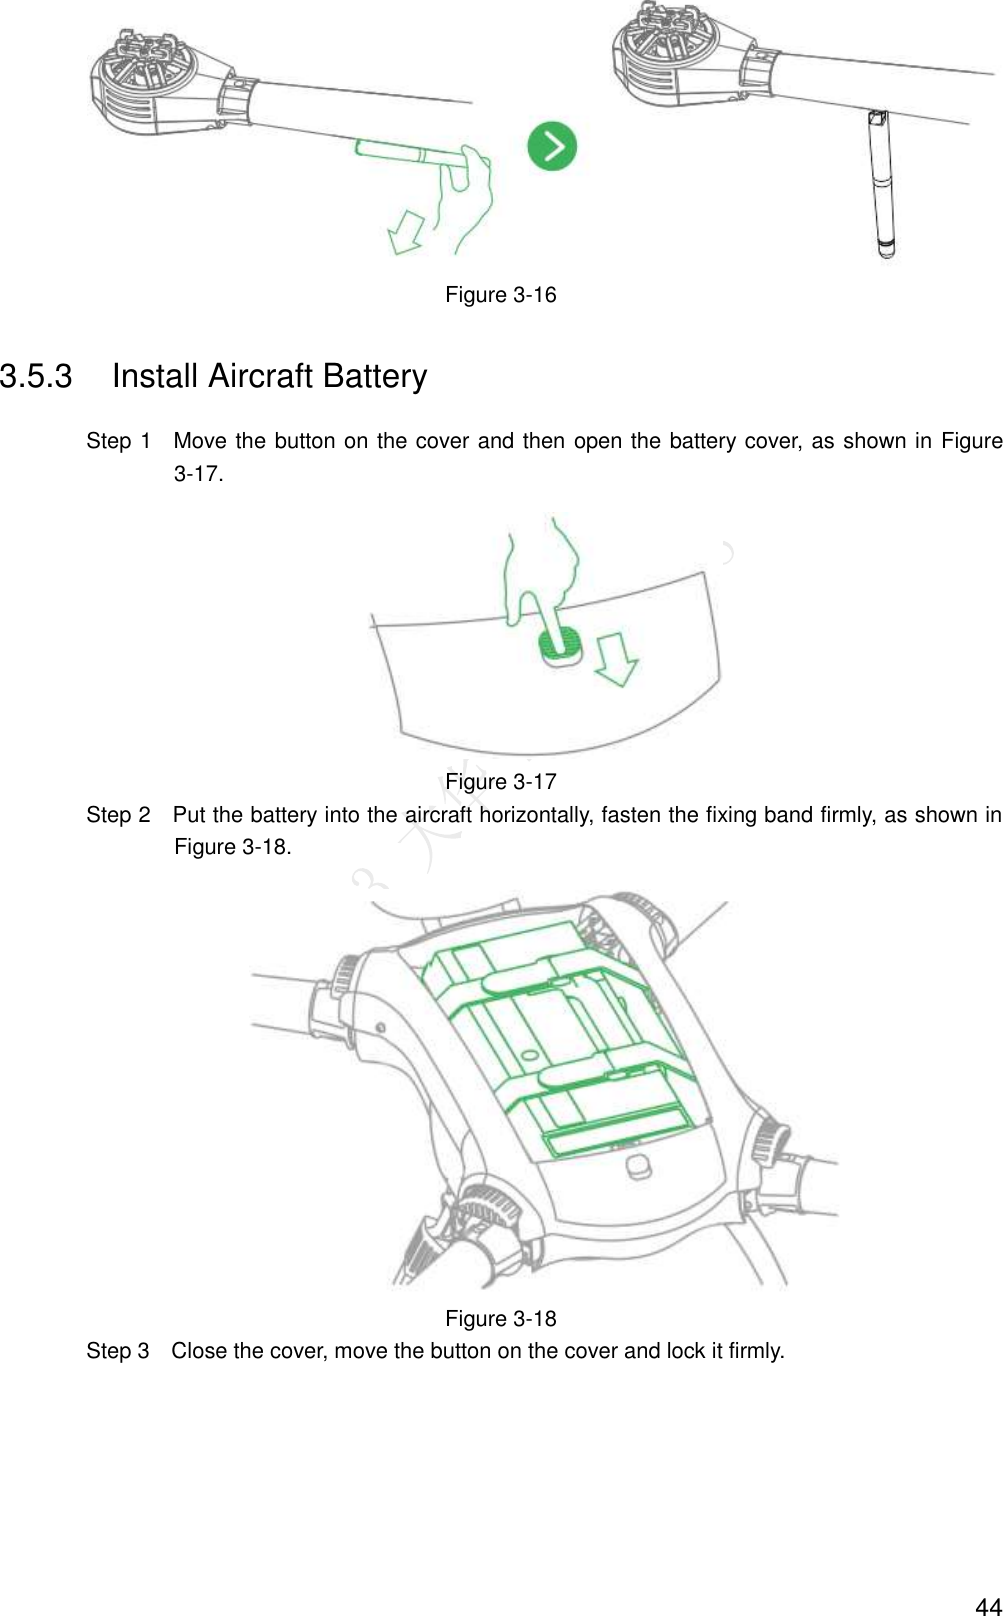  44  Figure 3-16 3.5.3  Install Aircraft Battery                 Step 1    Move the button on the cover and then open the battery cover, as shown in Figure 3-17.  Figure 3-17                 Step 2    Put the battery into the aircraft horizontally, fasten the fixing band firmly, as shown in Figure 3-18.  Figure 3-18                 Step 3    Close the cover, move the button on the cover and lock it firmly. 